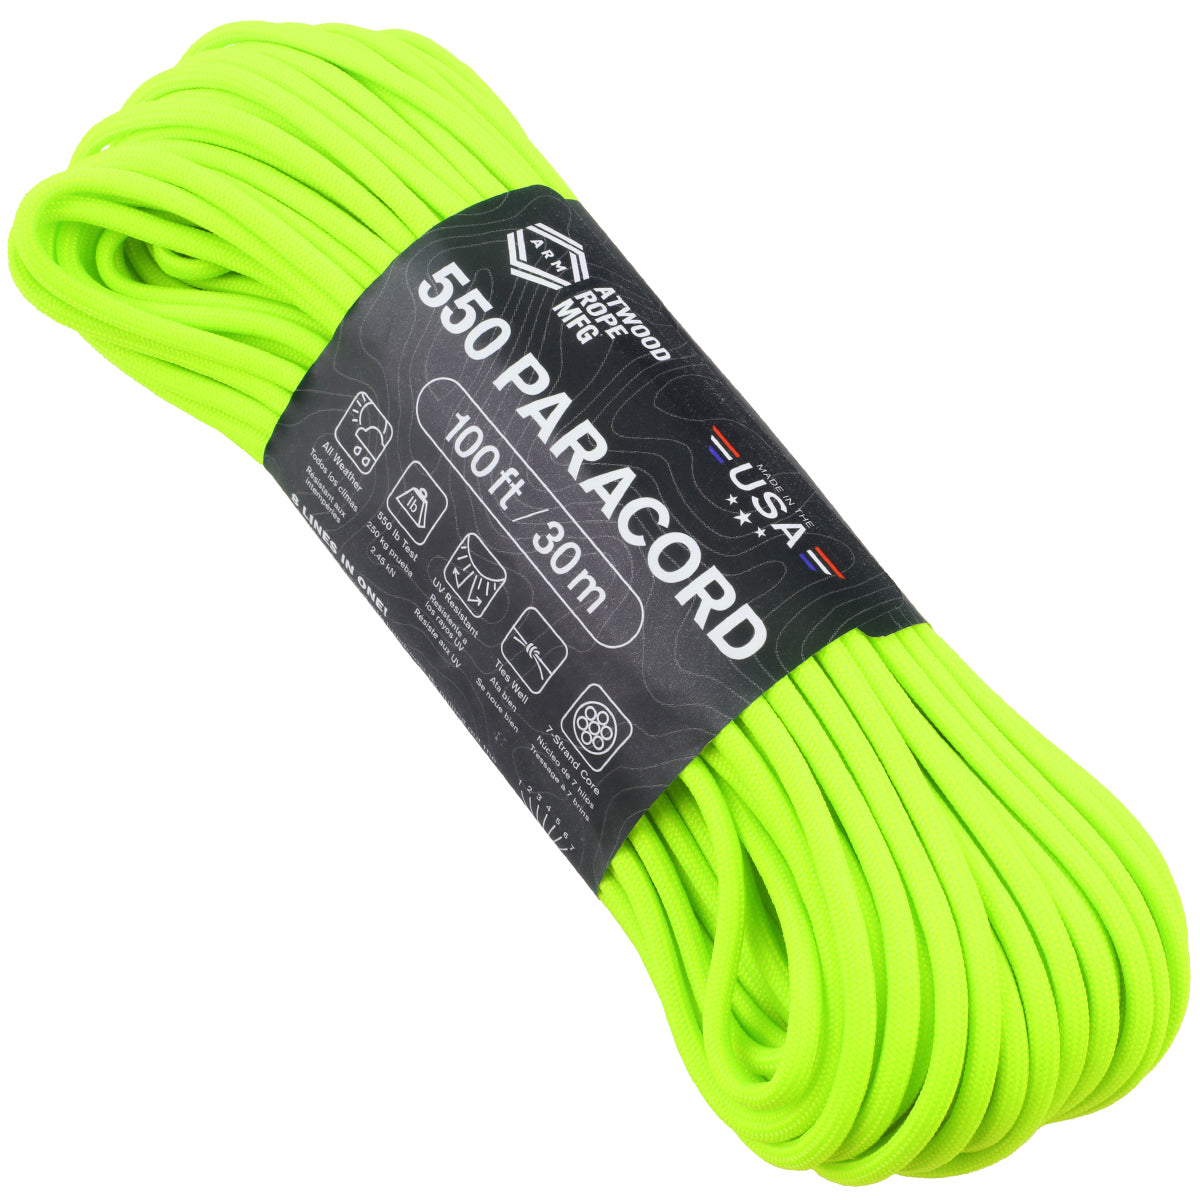 Forest Green Hoodie Strings Made of Paracord - 550lbs of strength